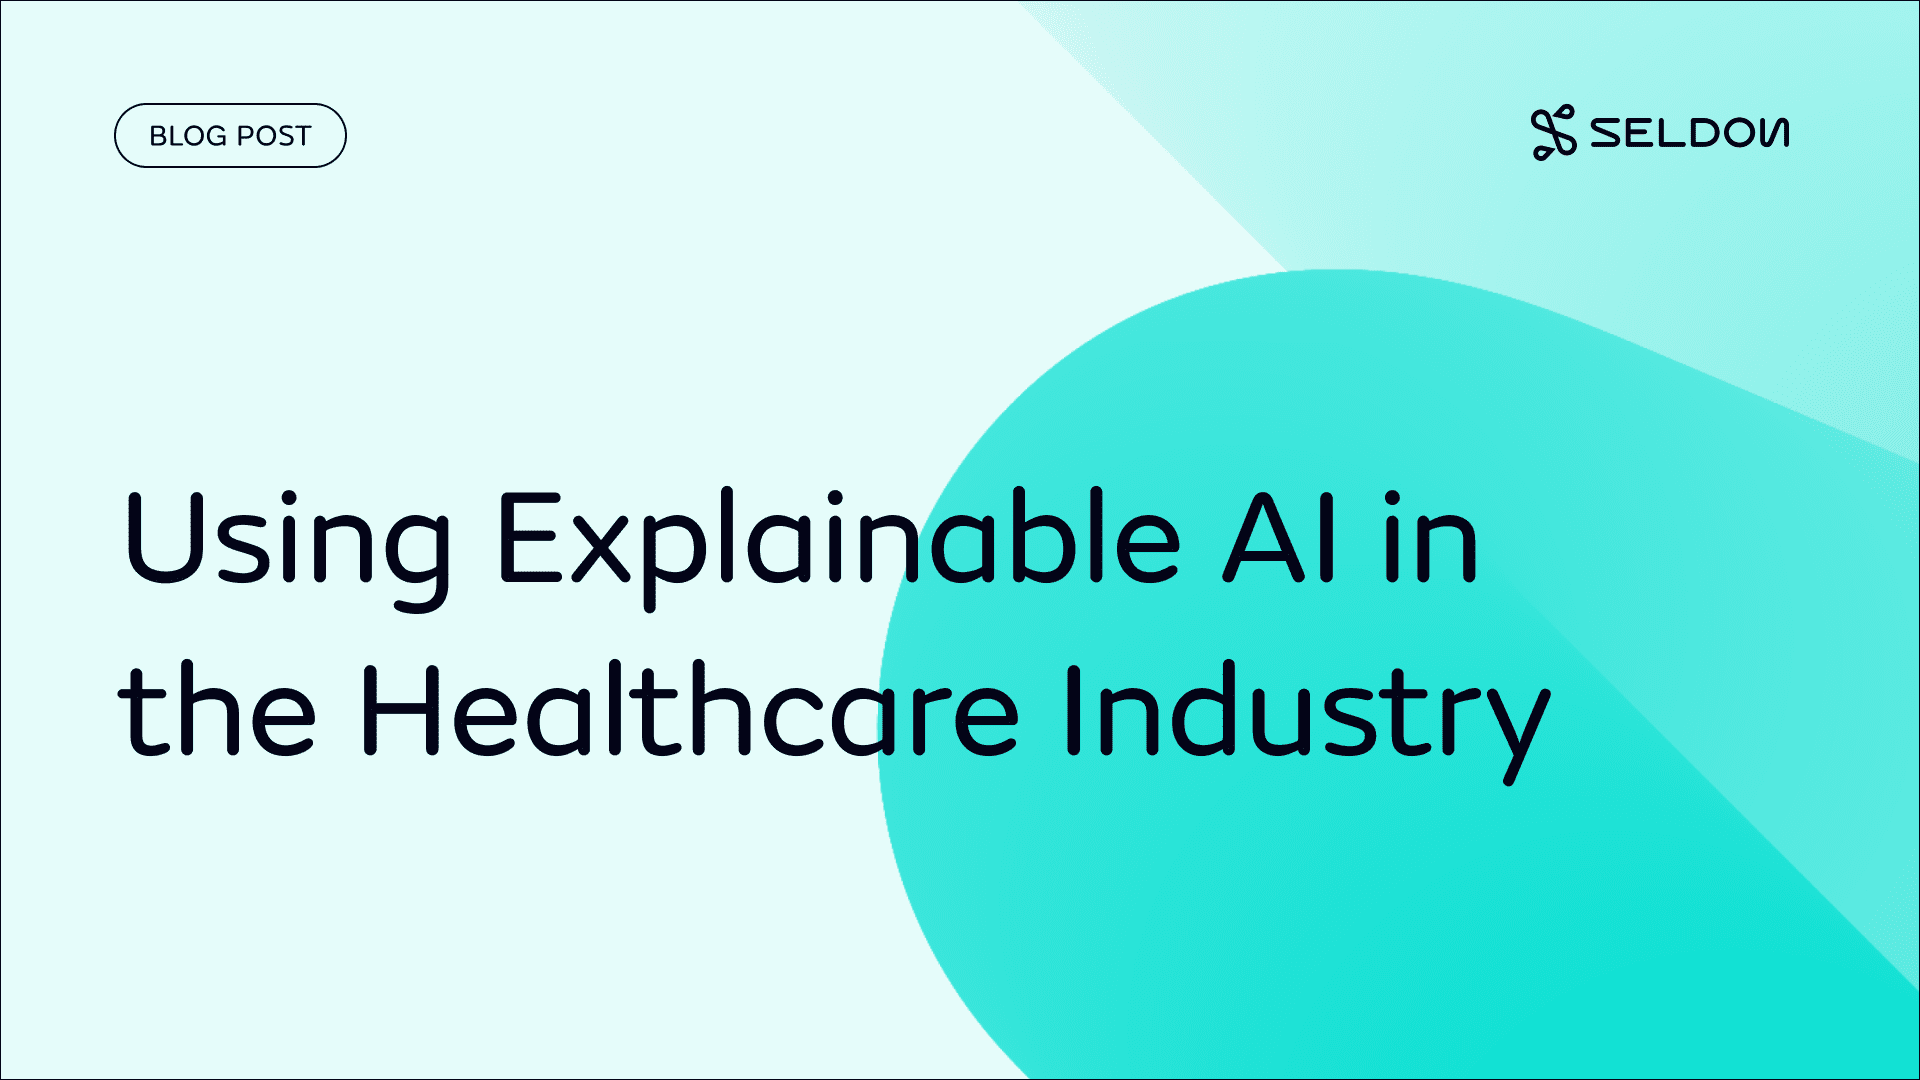 Using Explainable AI (XAI) for Compliance and Trust in the Healthcare Industry